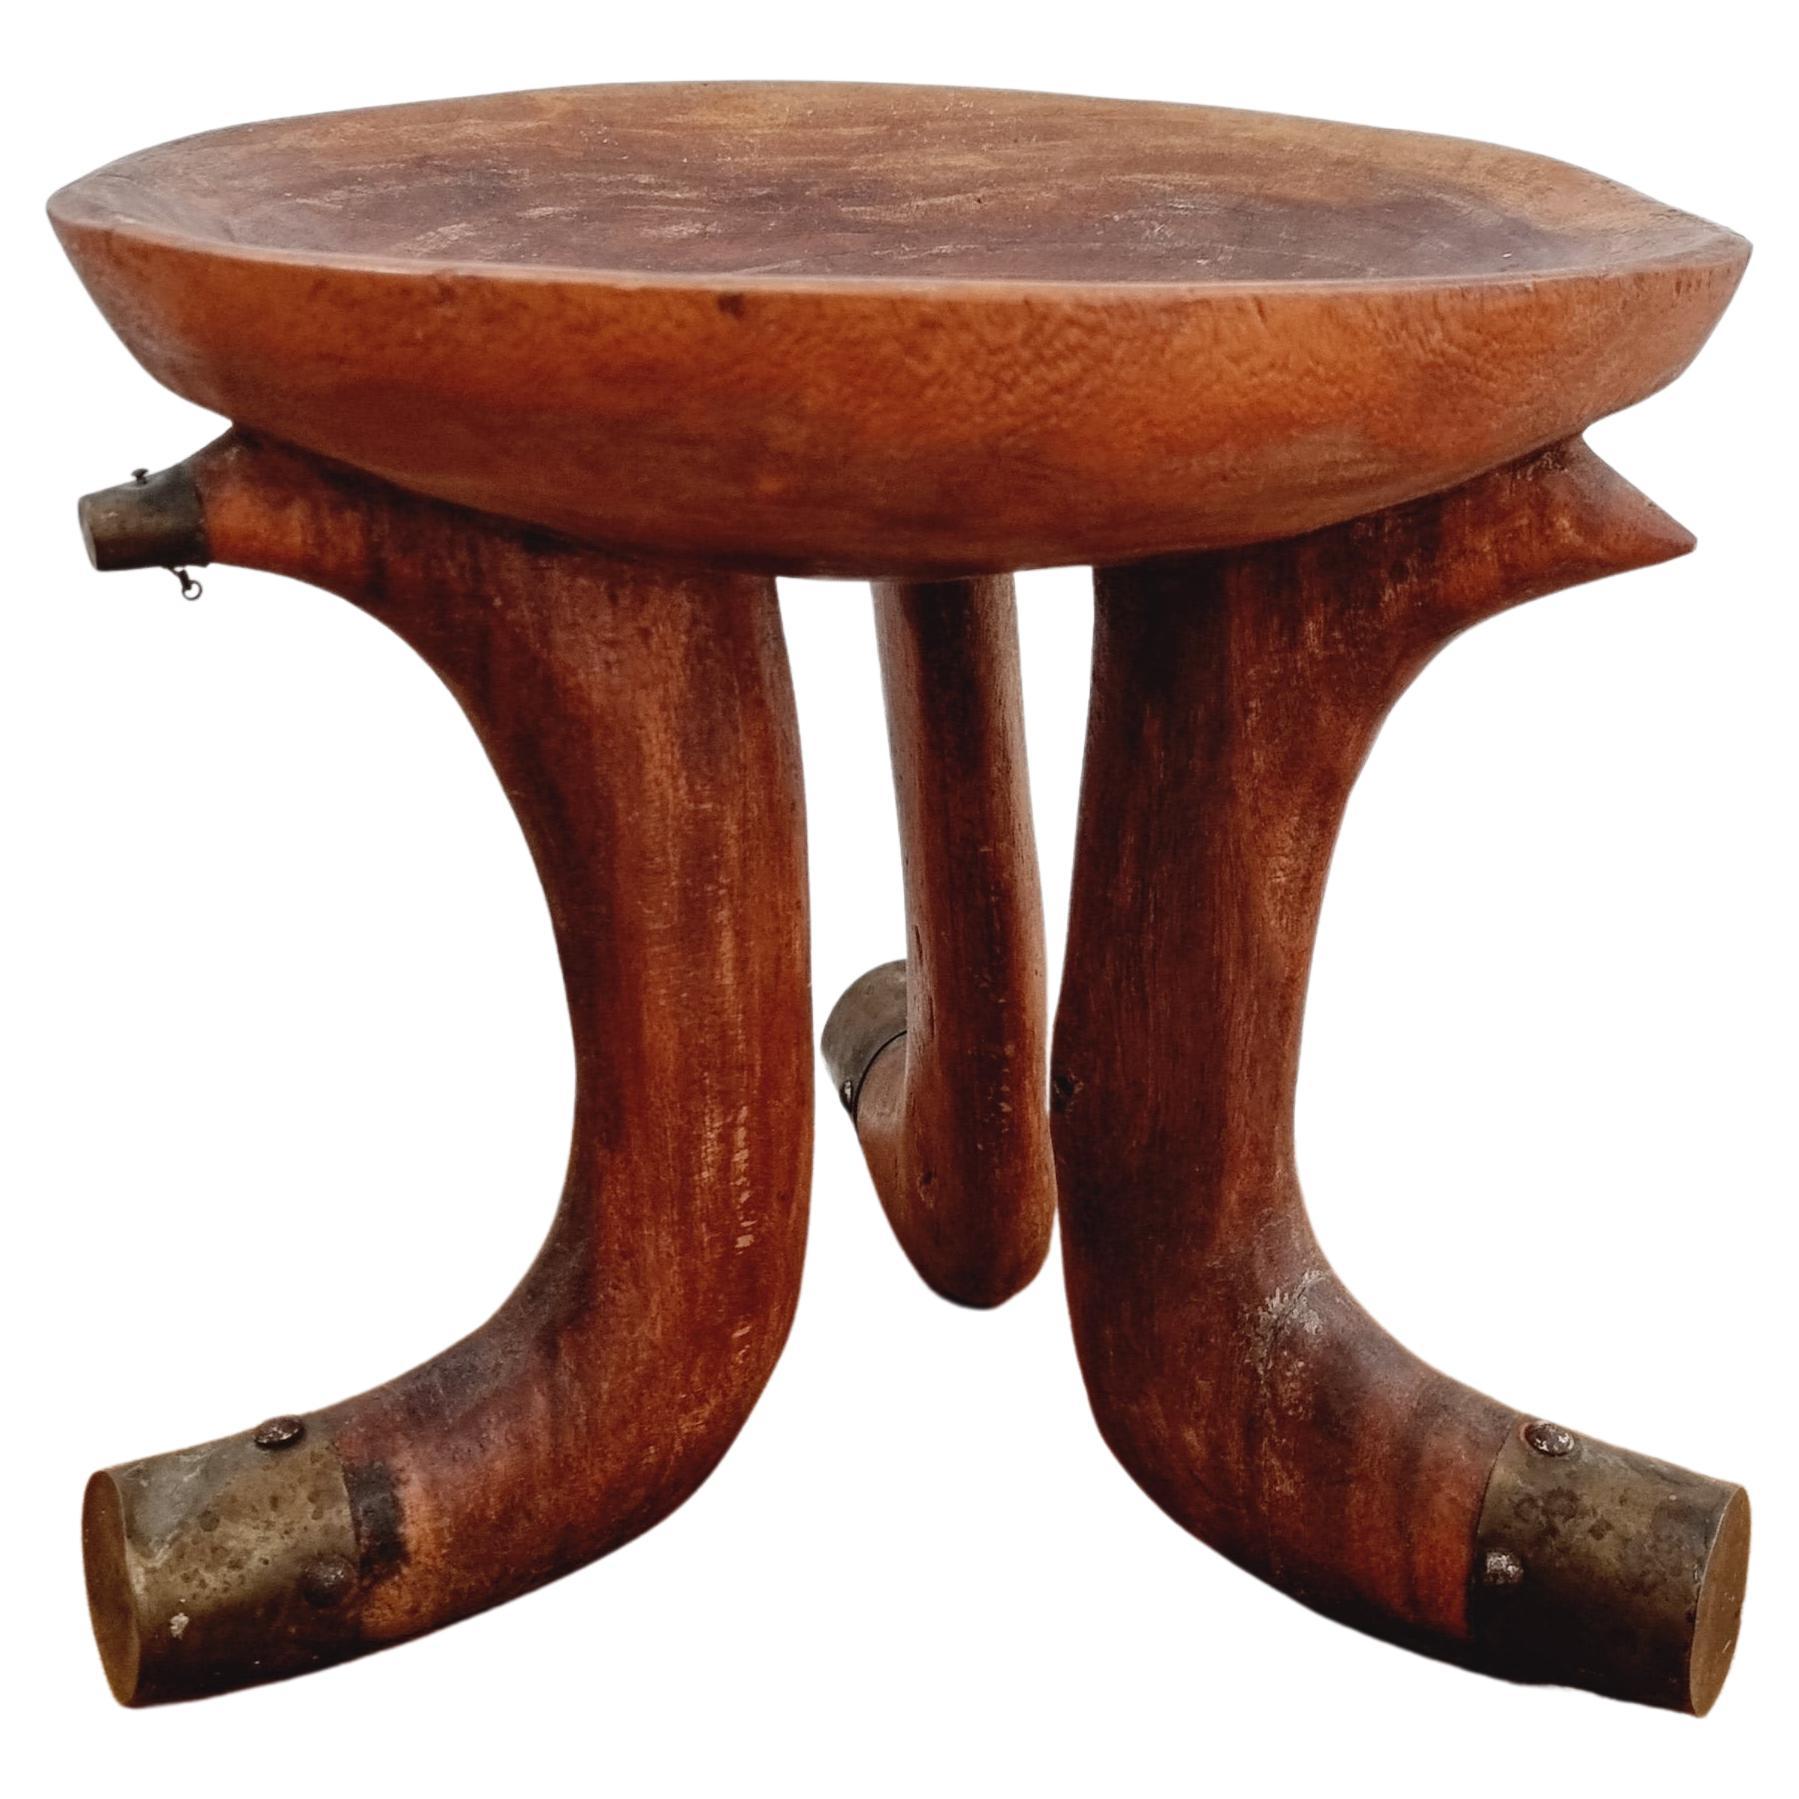 Tribal Stool with Brass Details, Southern Ethiopia, Early 20th Century For Sale